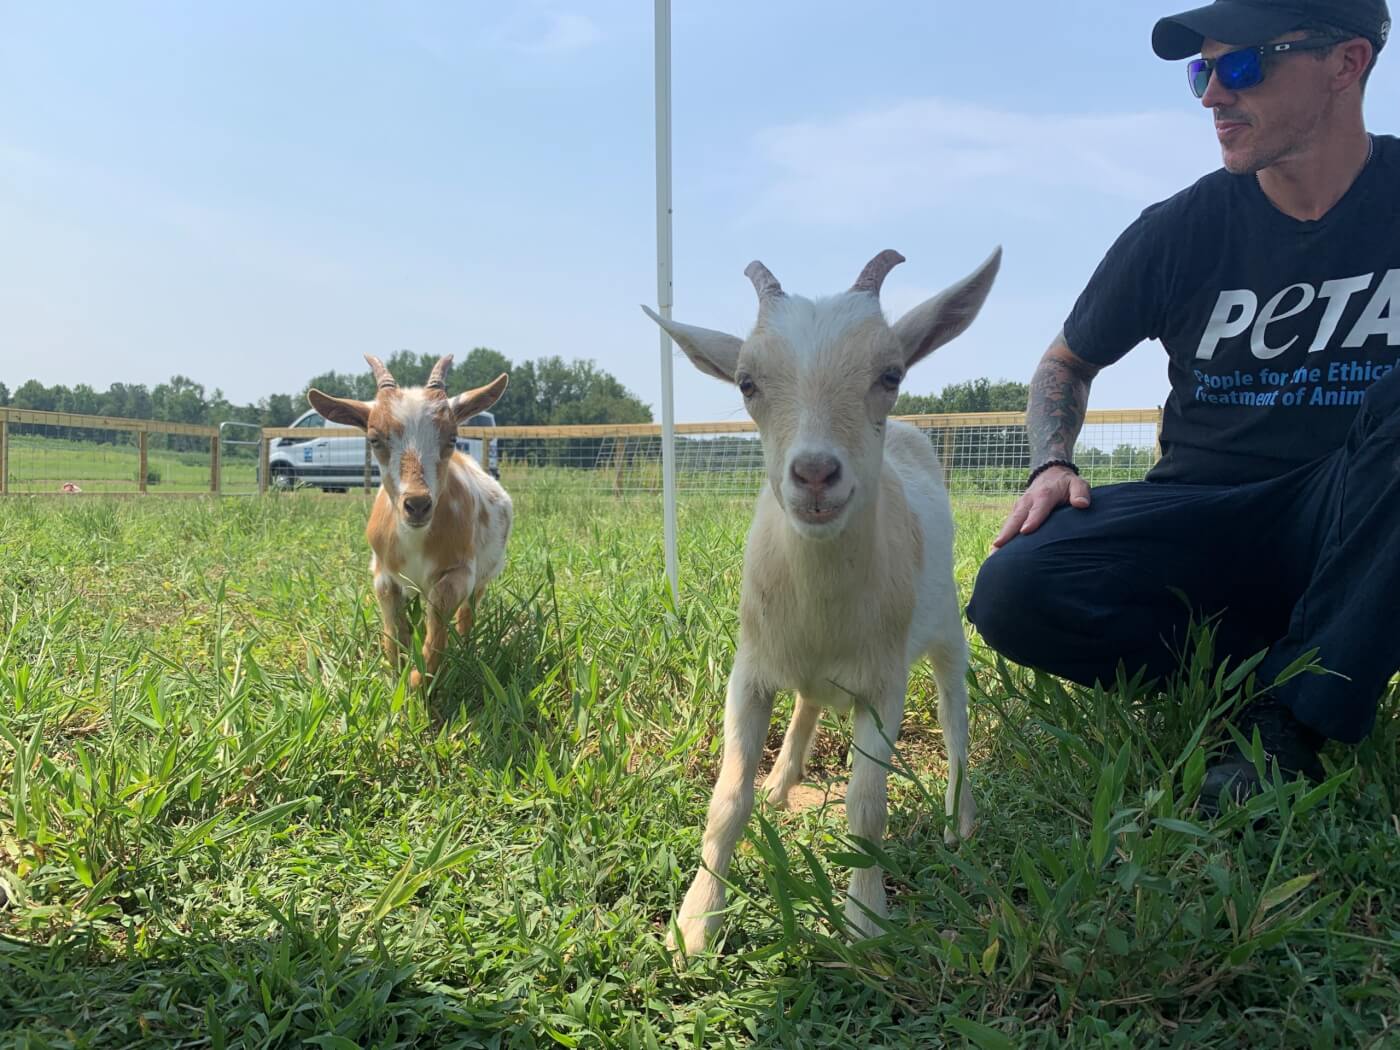 Two young goats, in a fenced enclosure with a person in a PETA shirt crouching in background.